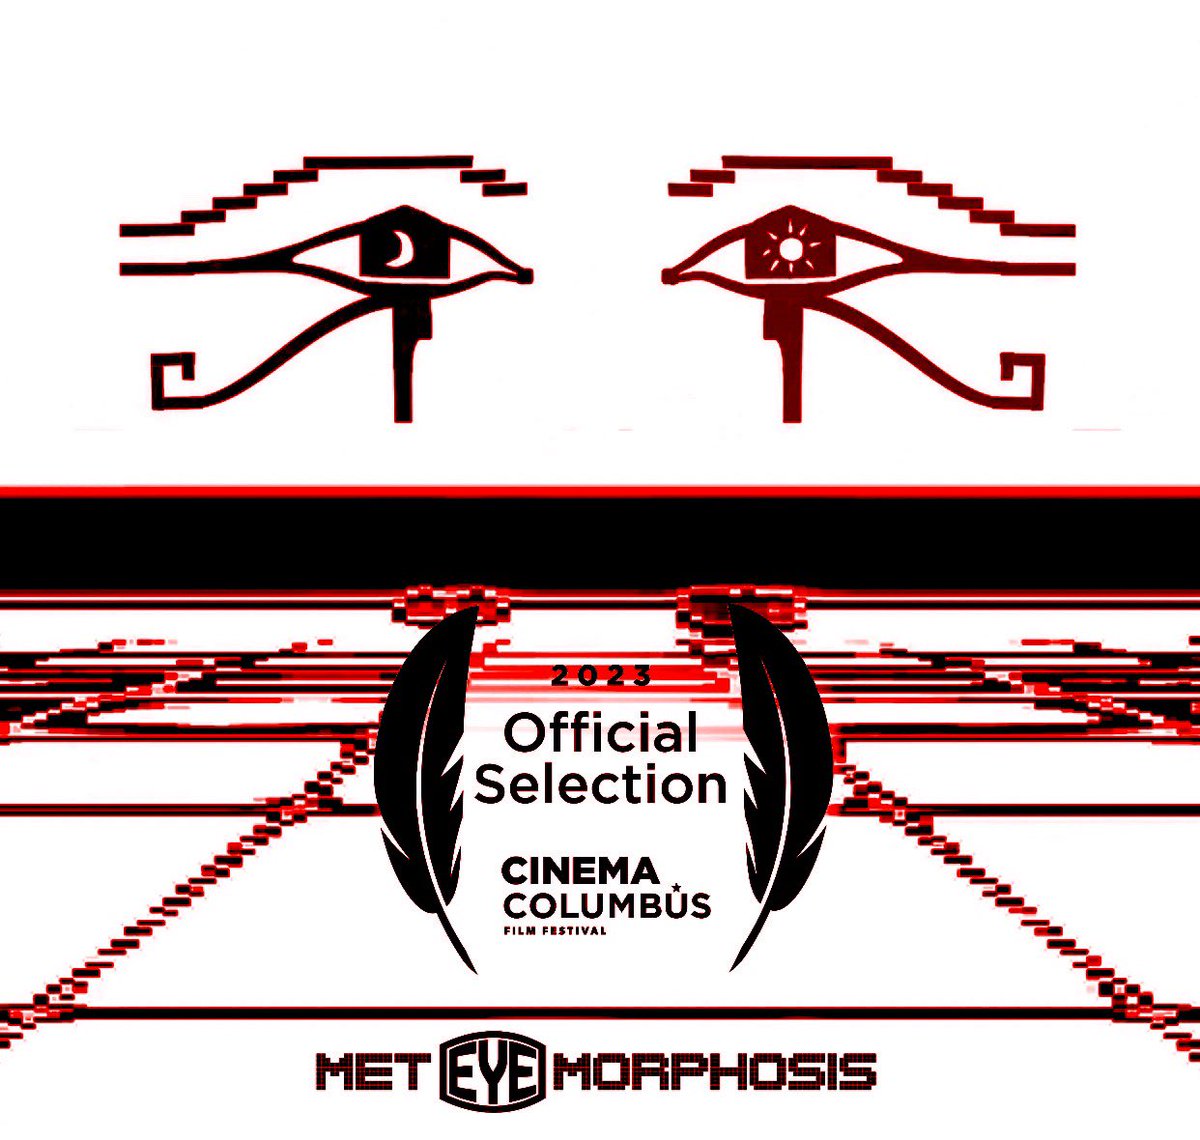 I am thrilled to announce that #meteyemorphosis will be screening April 28th at 4:00pm at the @GatewayFC as part of @cinemacolumbus ‘s local filmmaker block ! 👁️🦋🎞️

#shortfilm #stopmotionanimation #columbusfilm #shellusterstudios #ccad